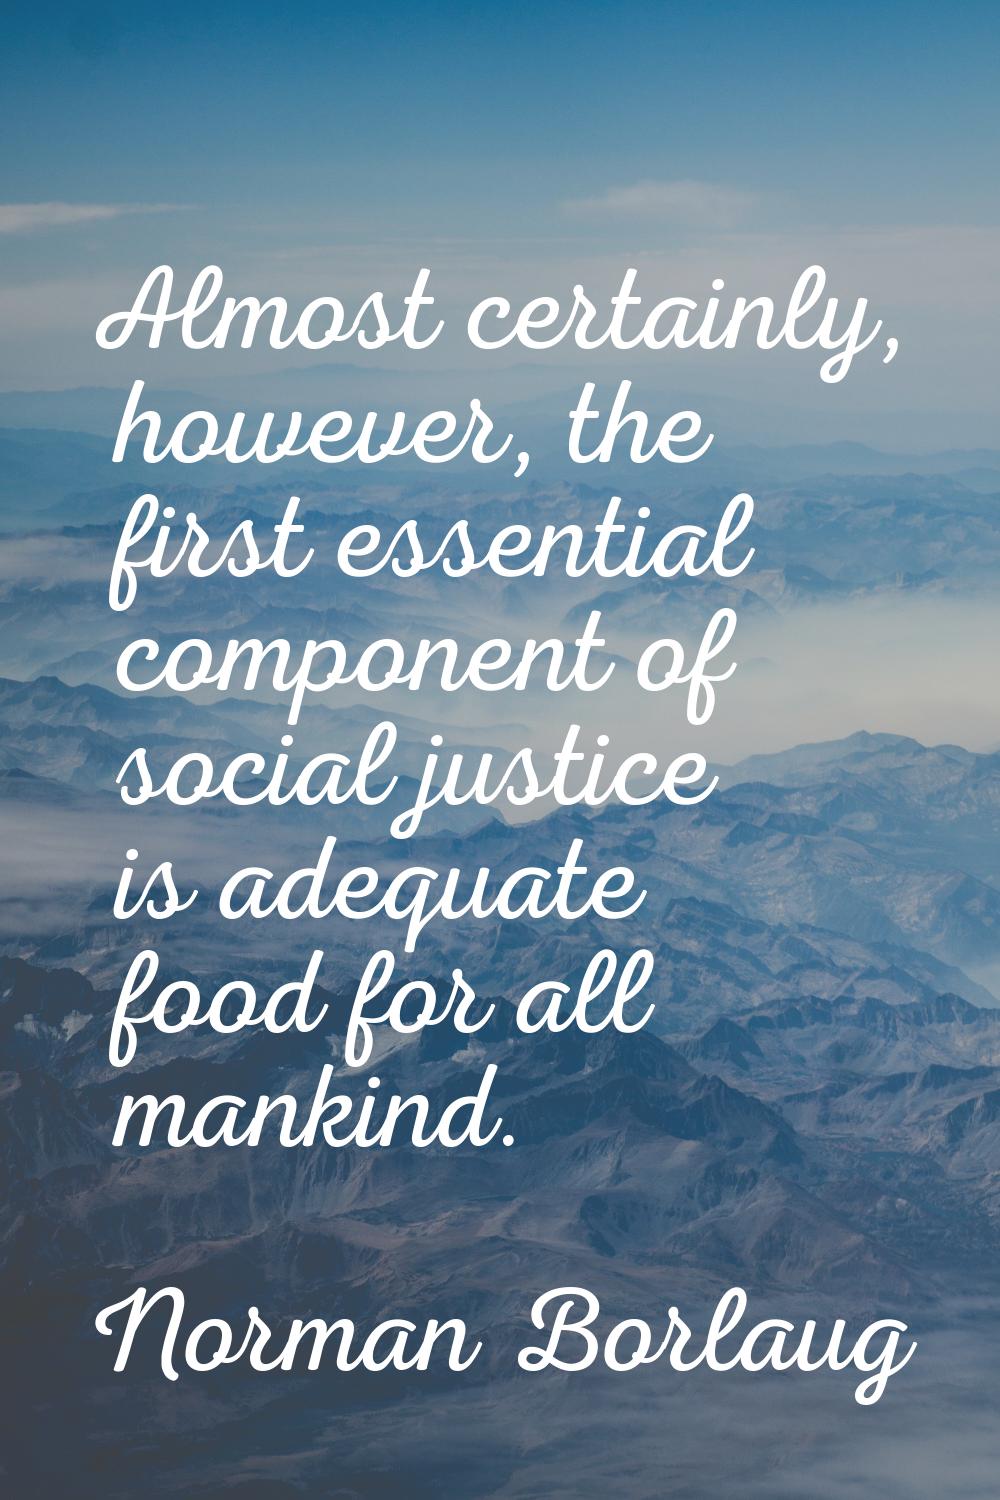 Almost certainly, however, the first essential component of social justice is adequate food for all